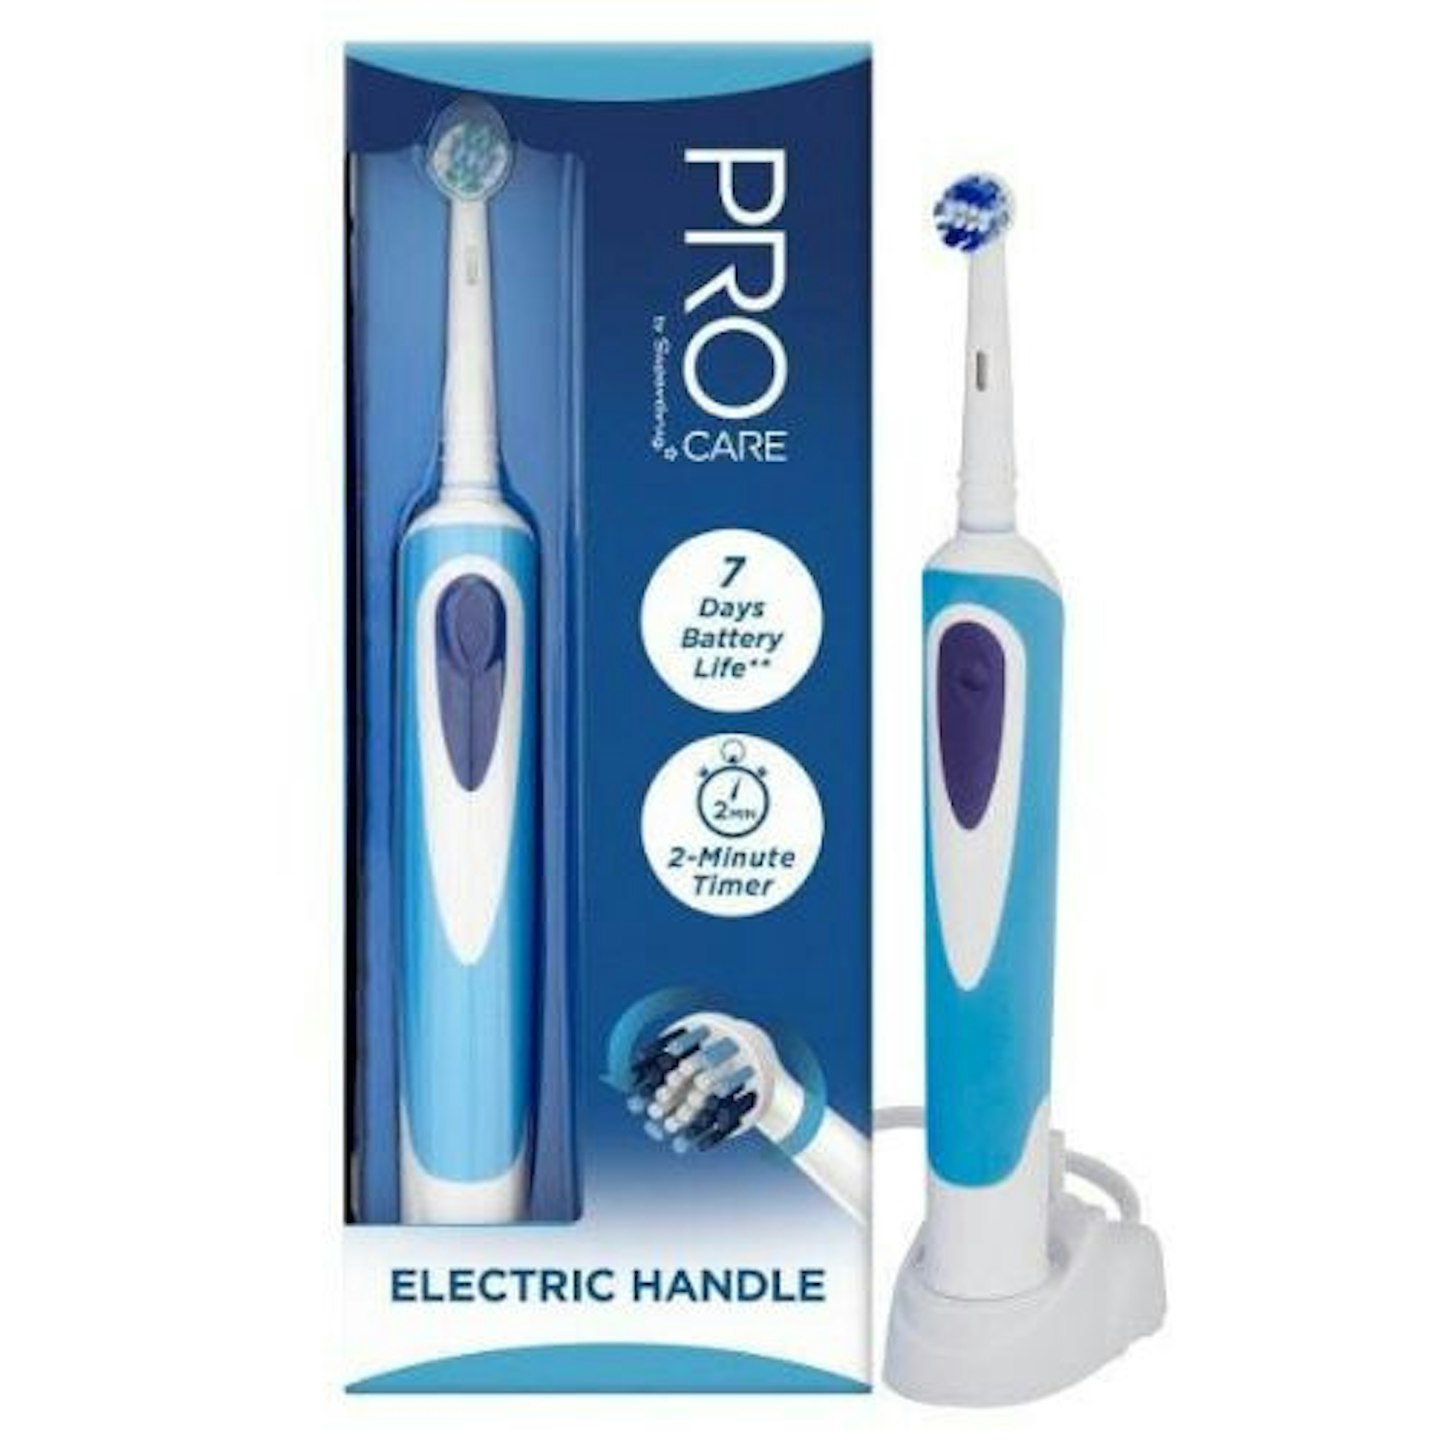 Superdrug Procare Advance Clean Rechargeable Toothbrush